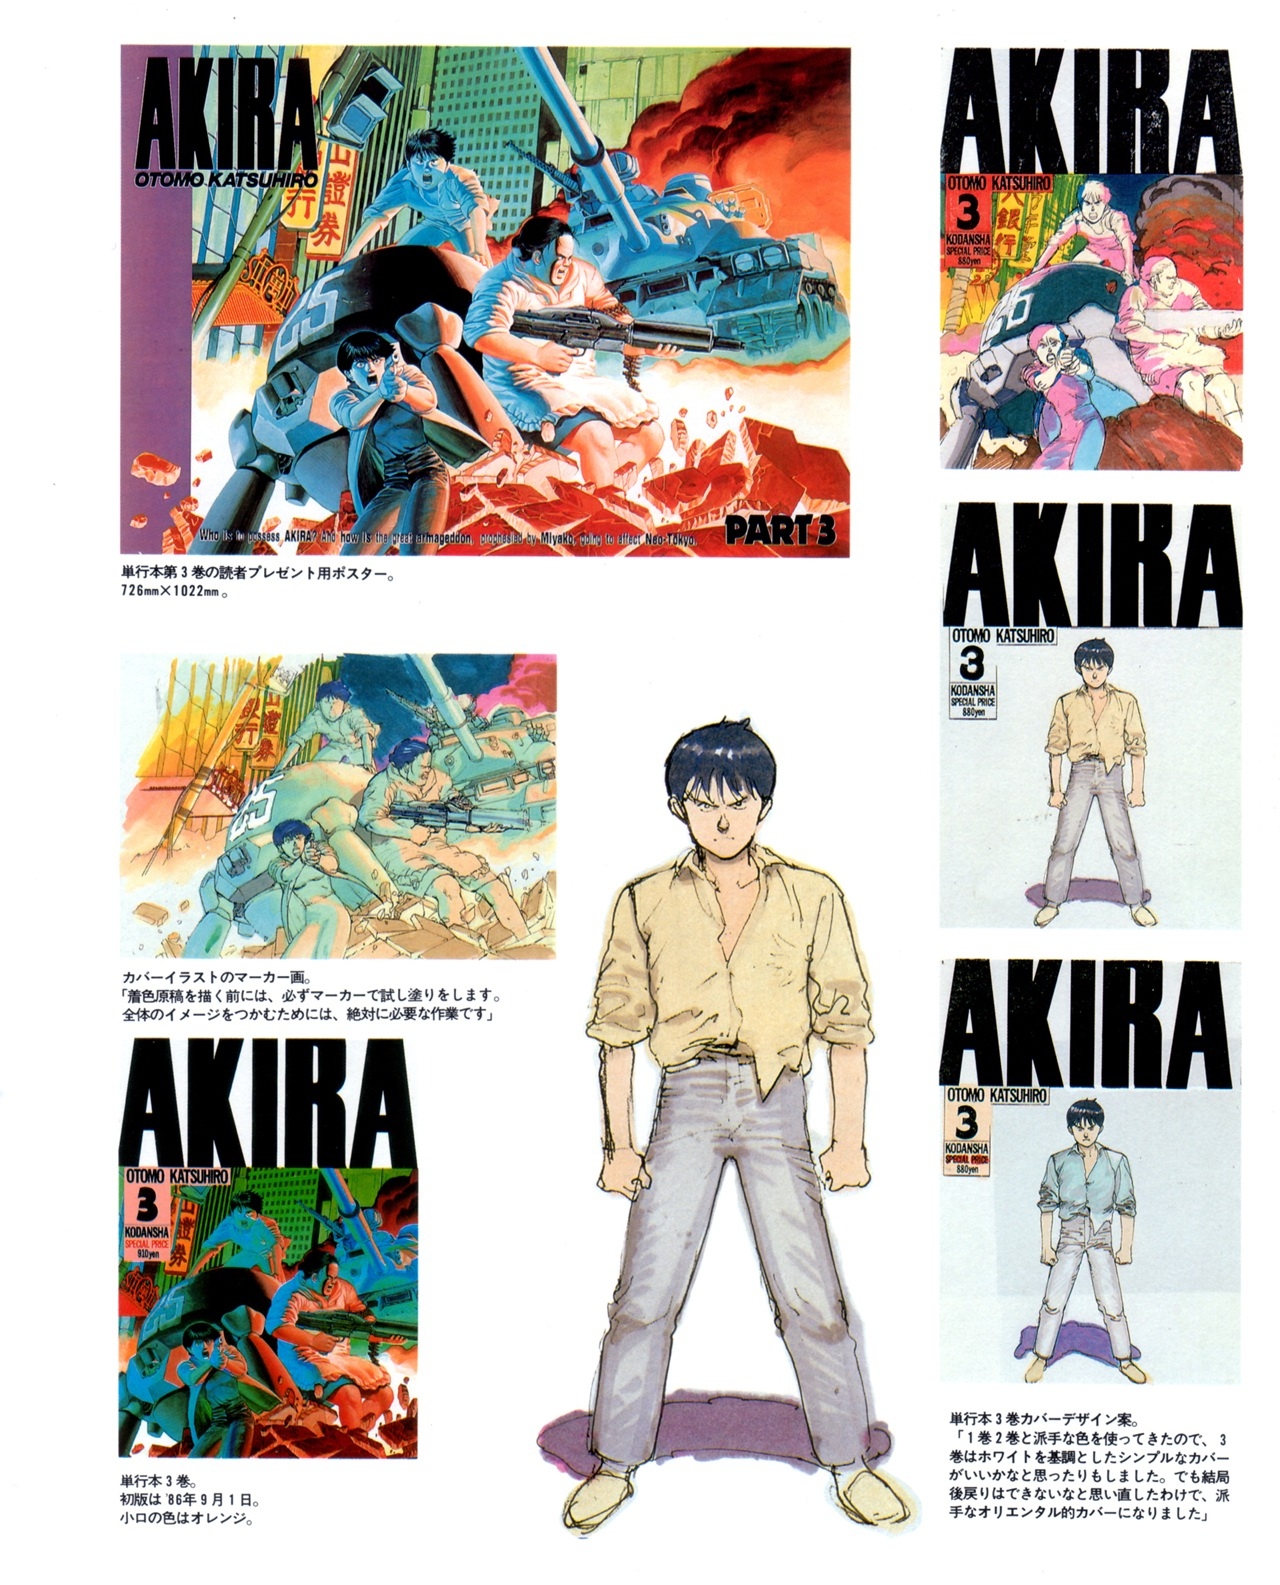 Akira club - The memory of Akira lives on in our hearts! 11